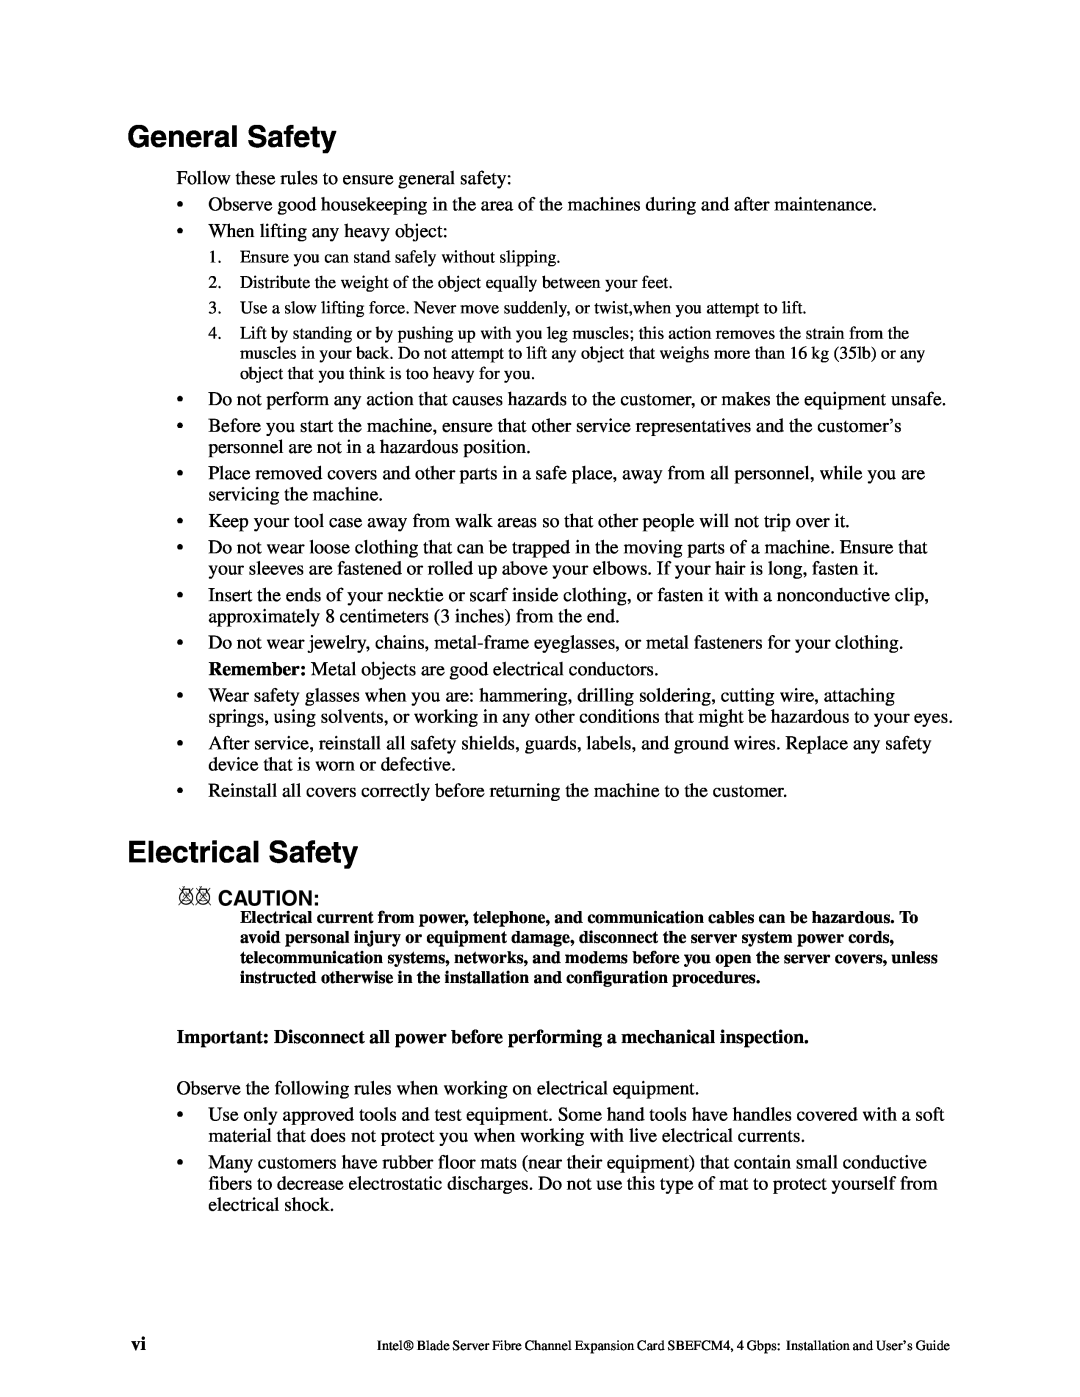 Intel SEBFCM4 manual General Safety, Electrical Safety, xx CAUTION 